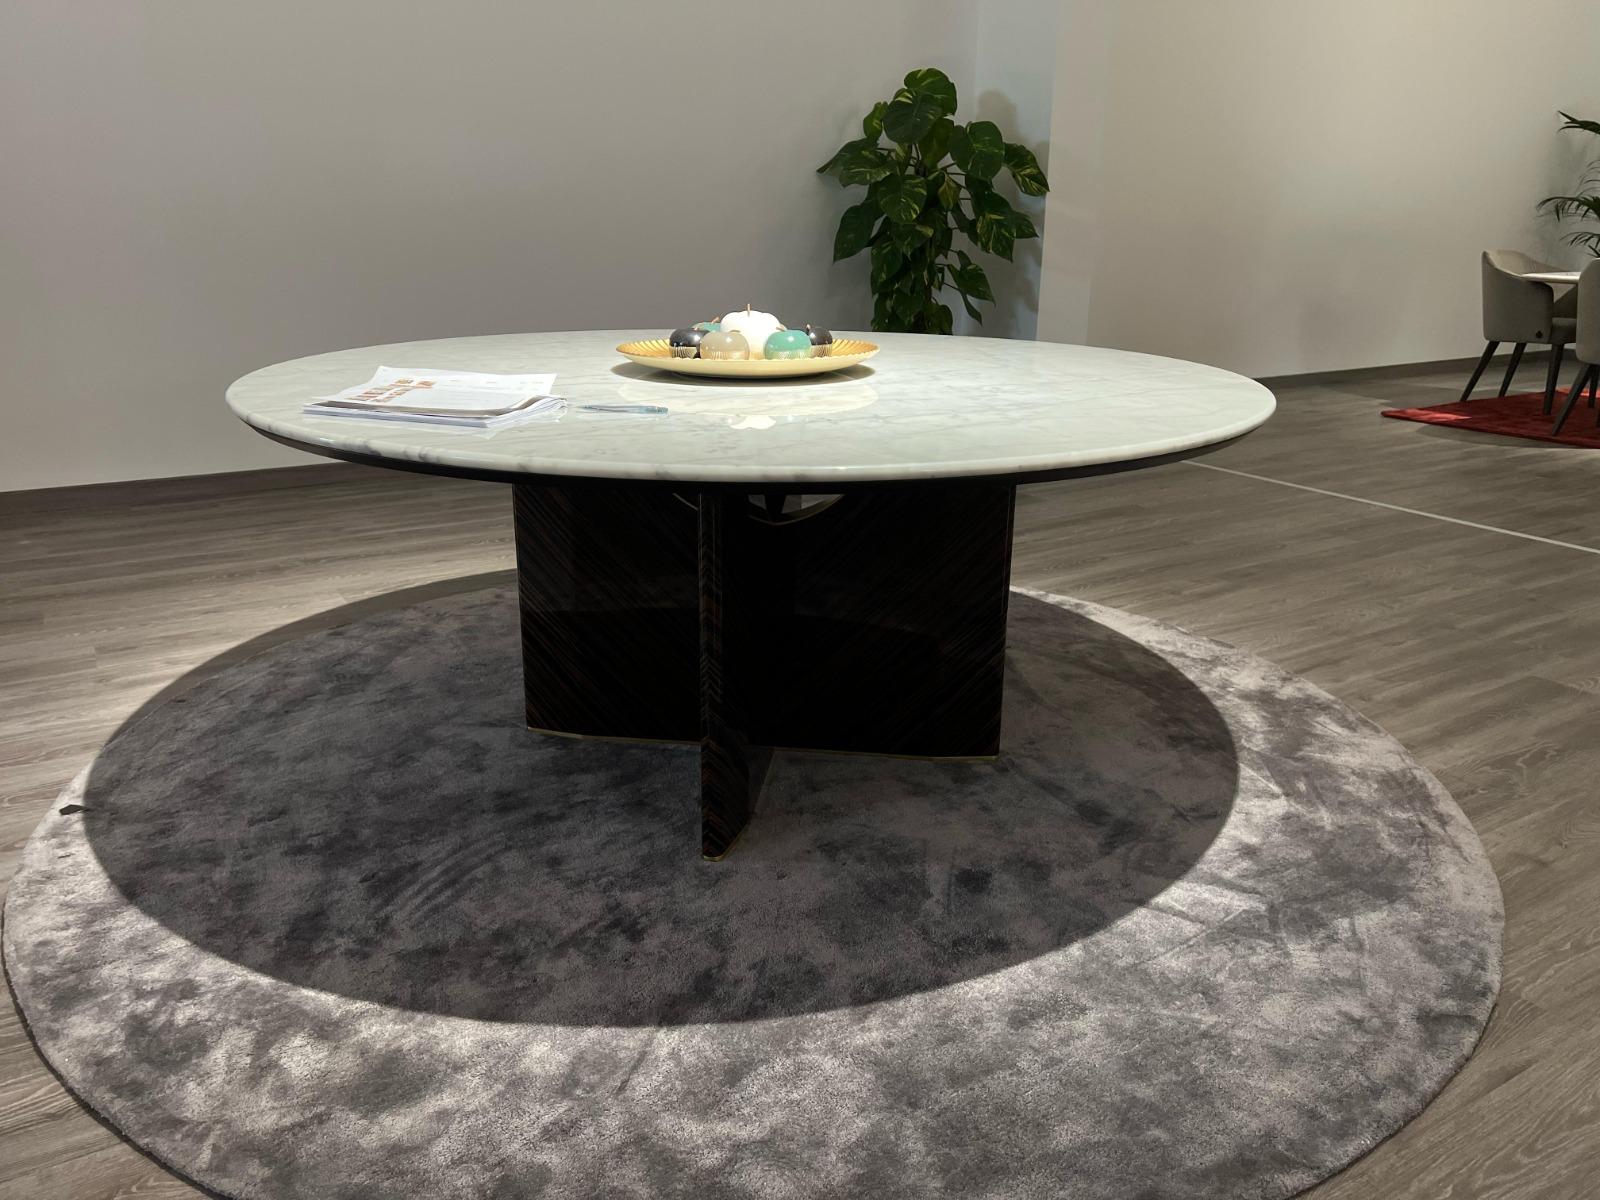 The table has always been the centerpiece of the living room. A nice table, in short, makes all the difference. From a simple piece of furniture, it has become in recent years, an object of study for designers and architects and an inspirational